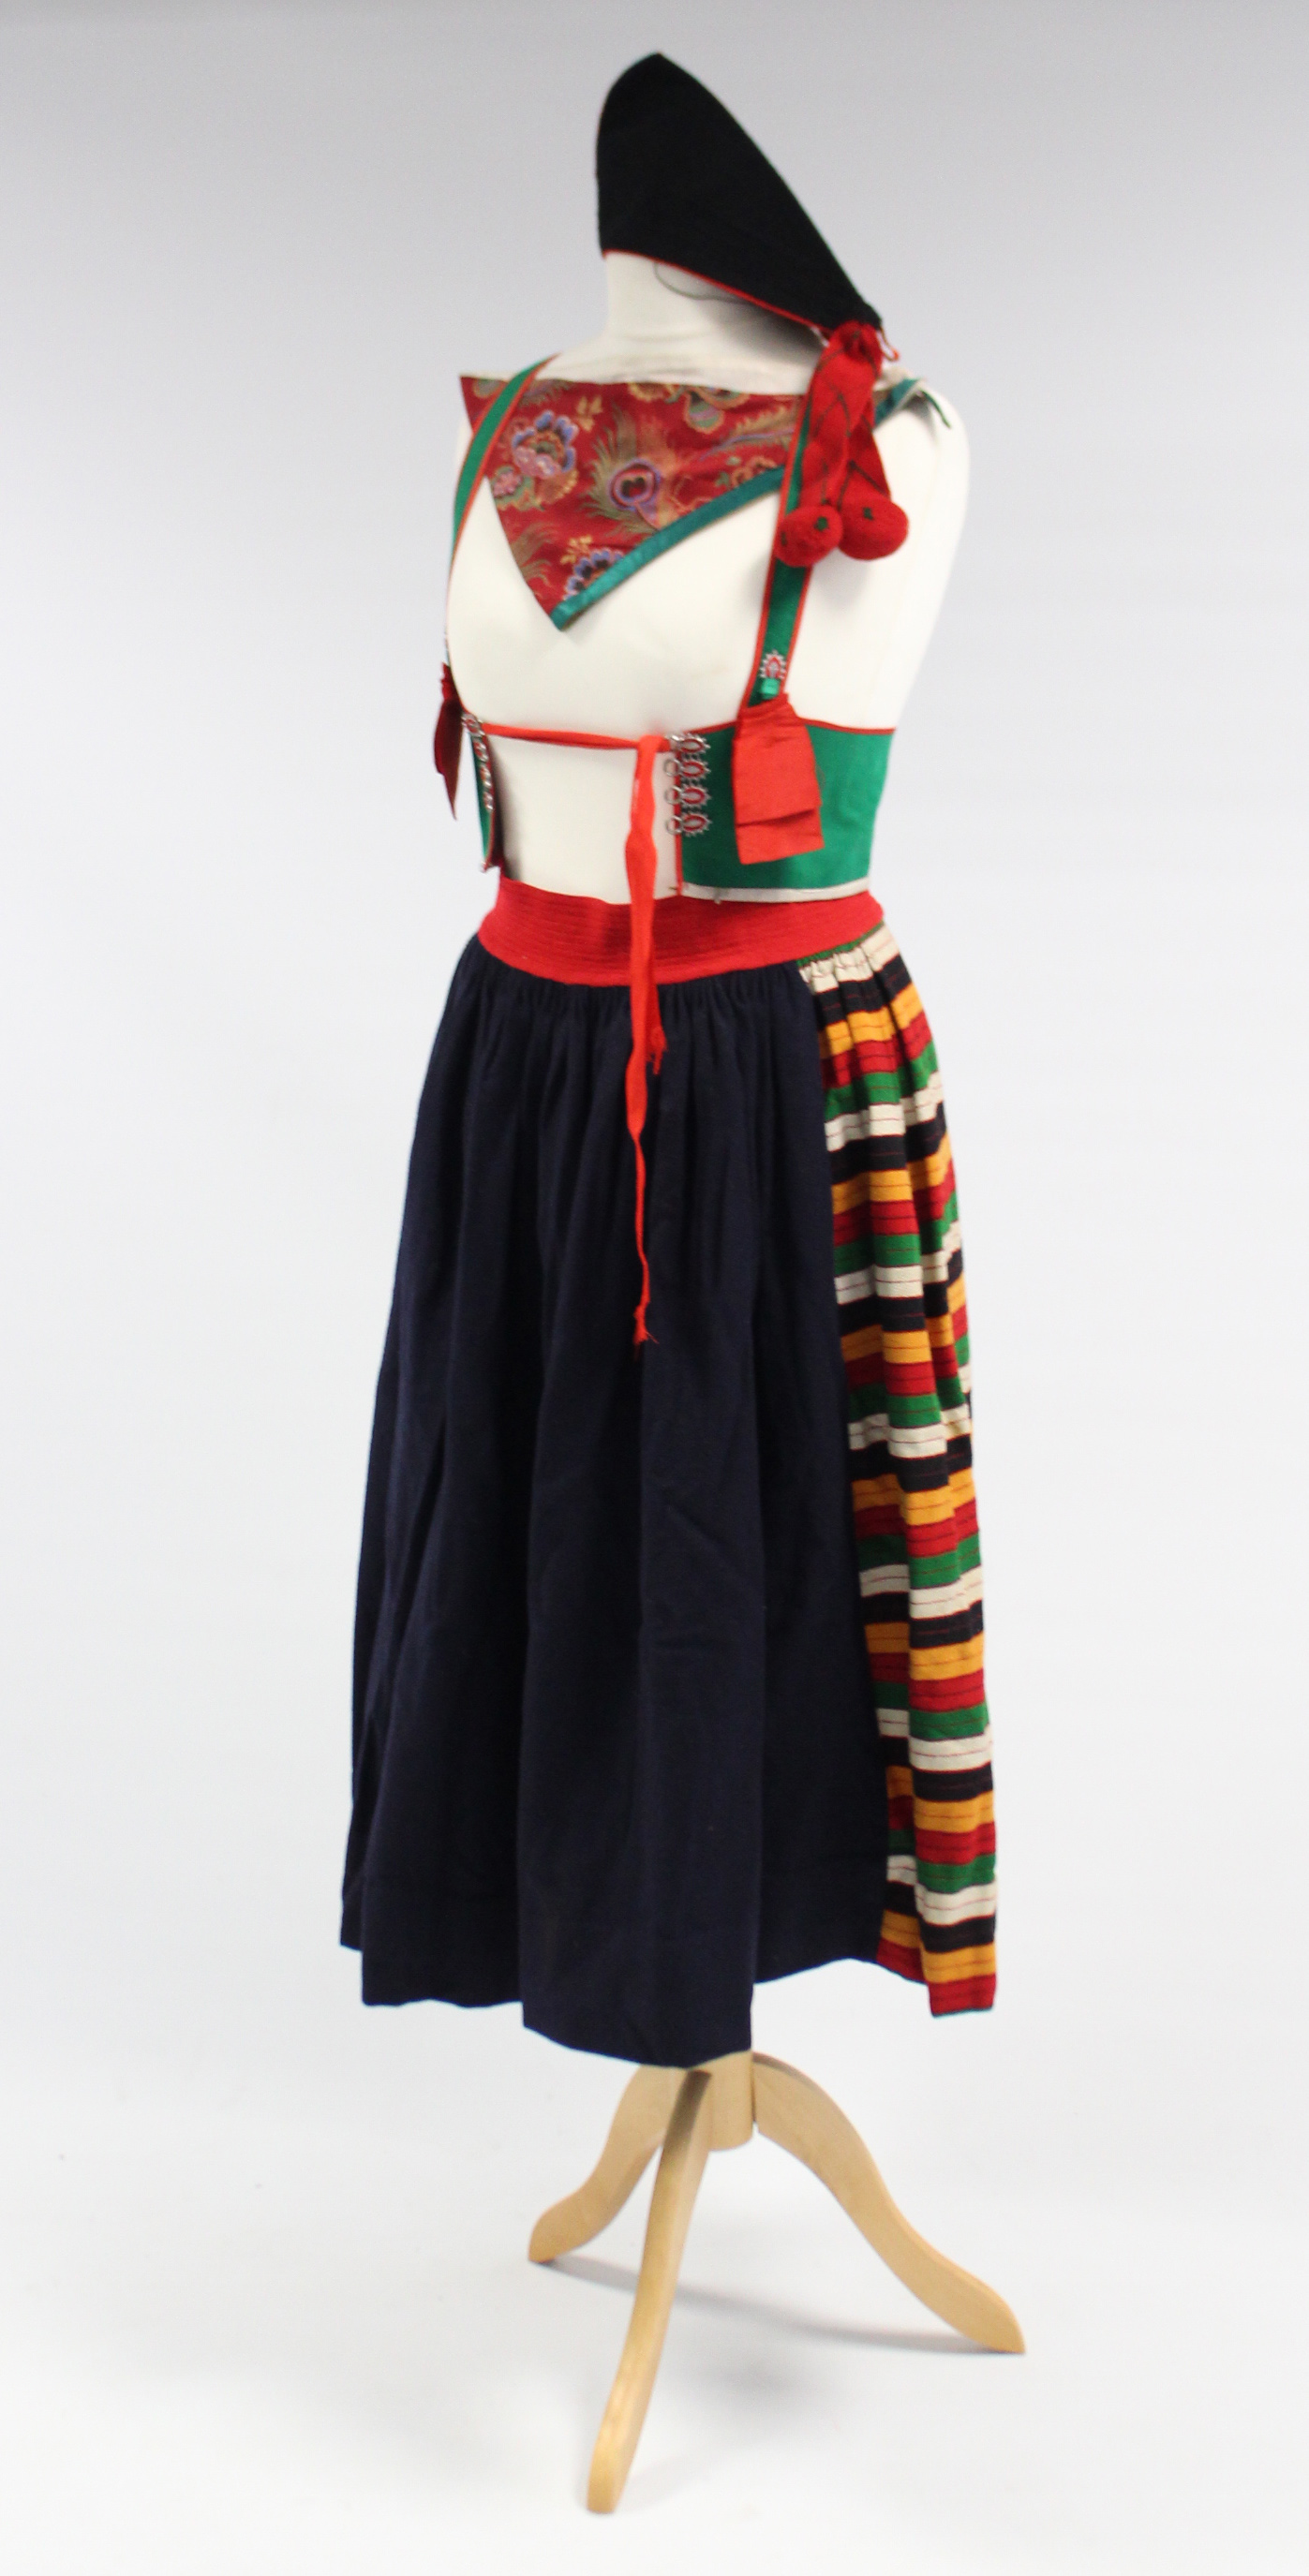 A mid-20th century school girl’s costume comprising a skirt, waistcoat, scarf & a hat.